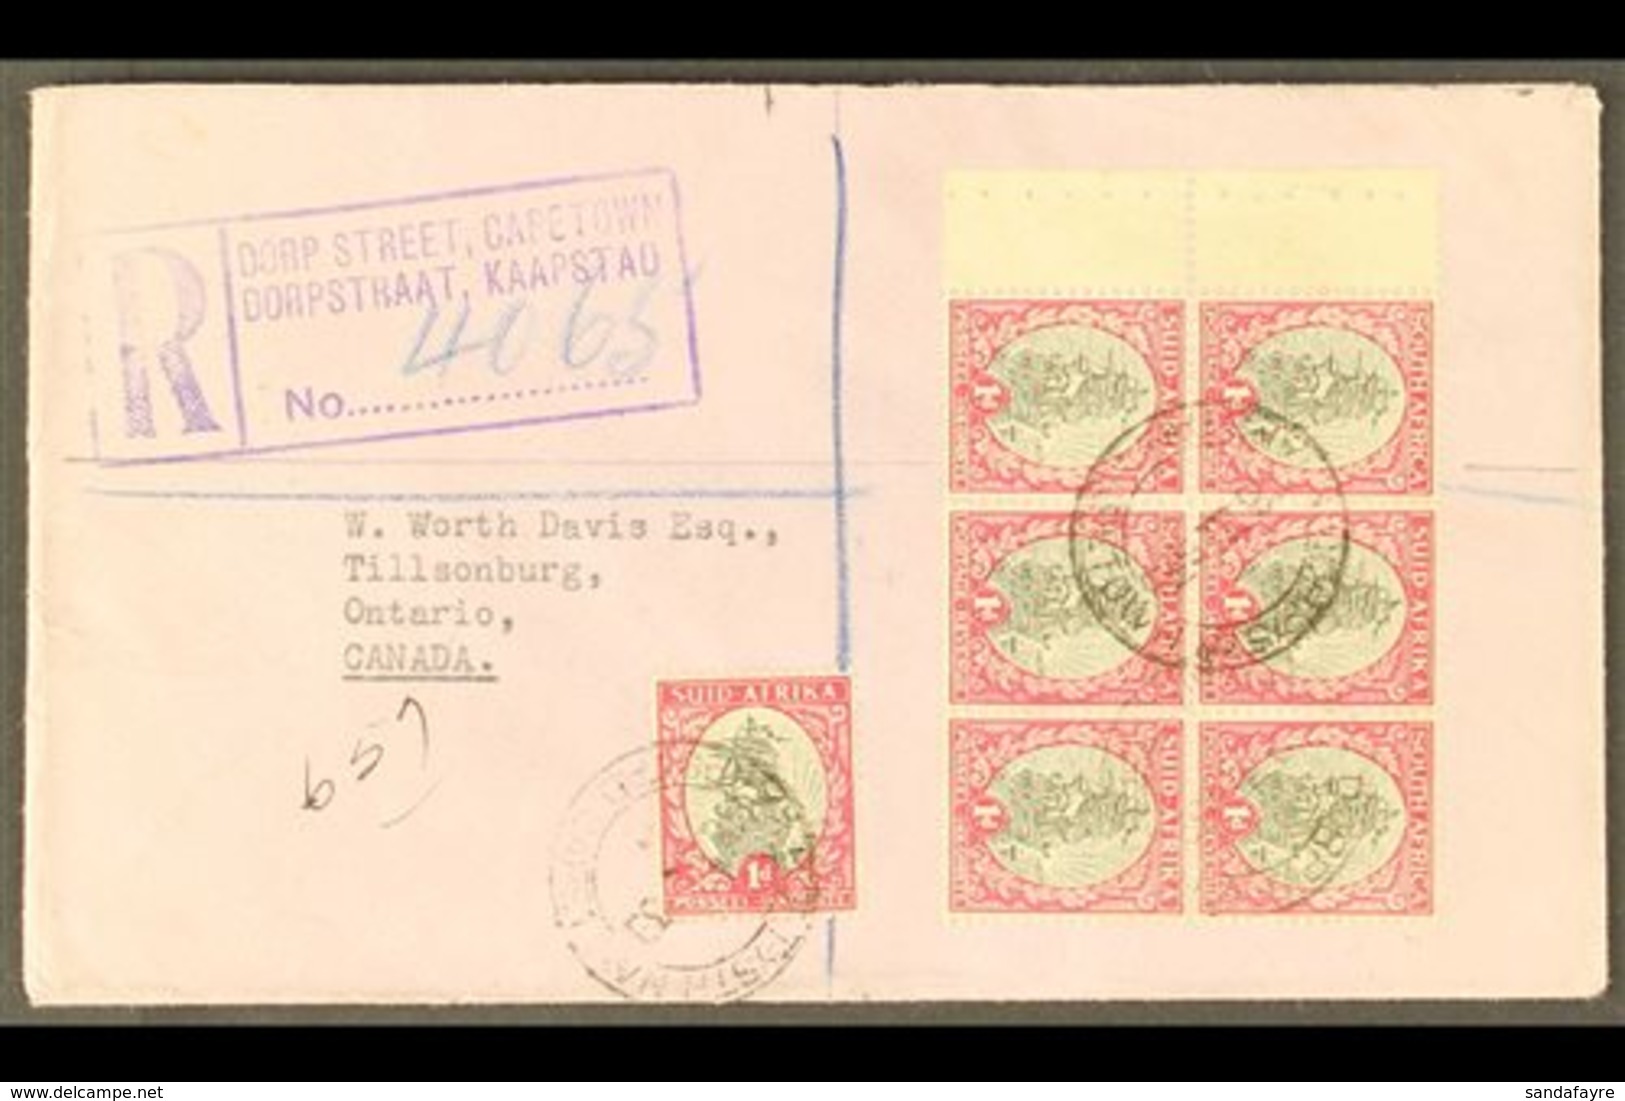 1939 Reg'd Cover To Canada, Franked With 1d BOOKLET PANE Of 6 Plus 1d Single, SG 56, Ex Booklet SG SB13 Or SB14, Neat, M - Unclassified